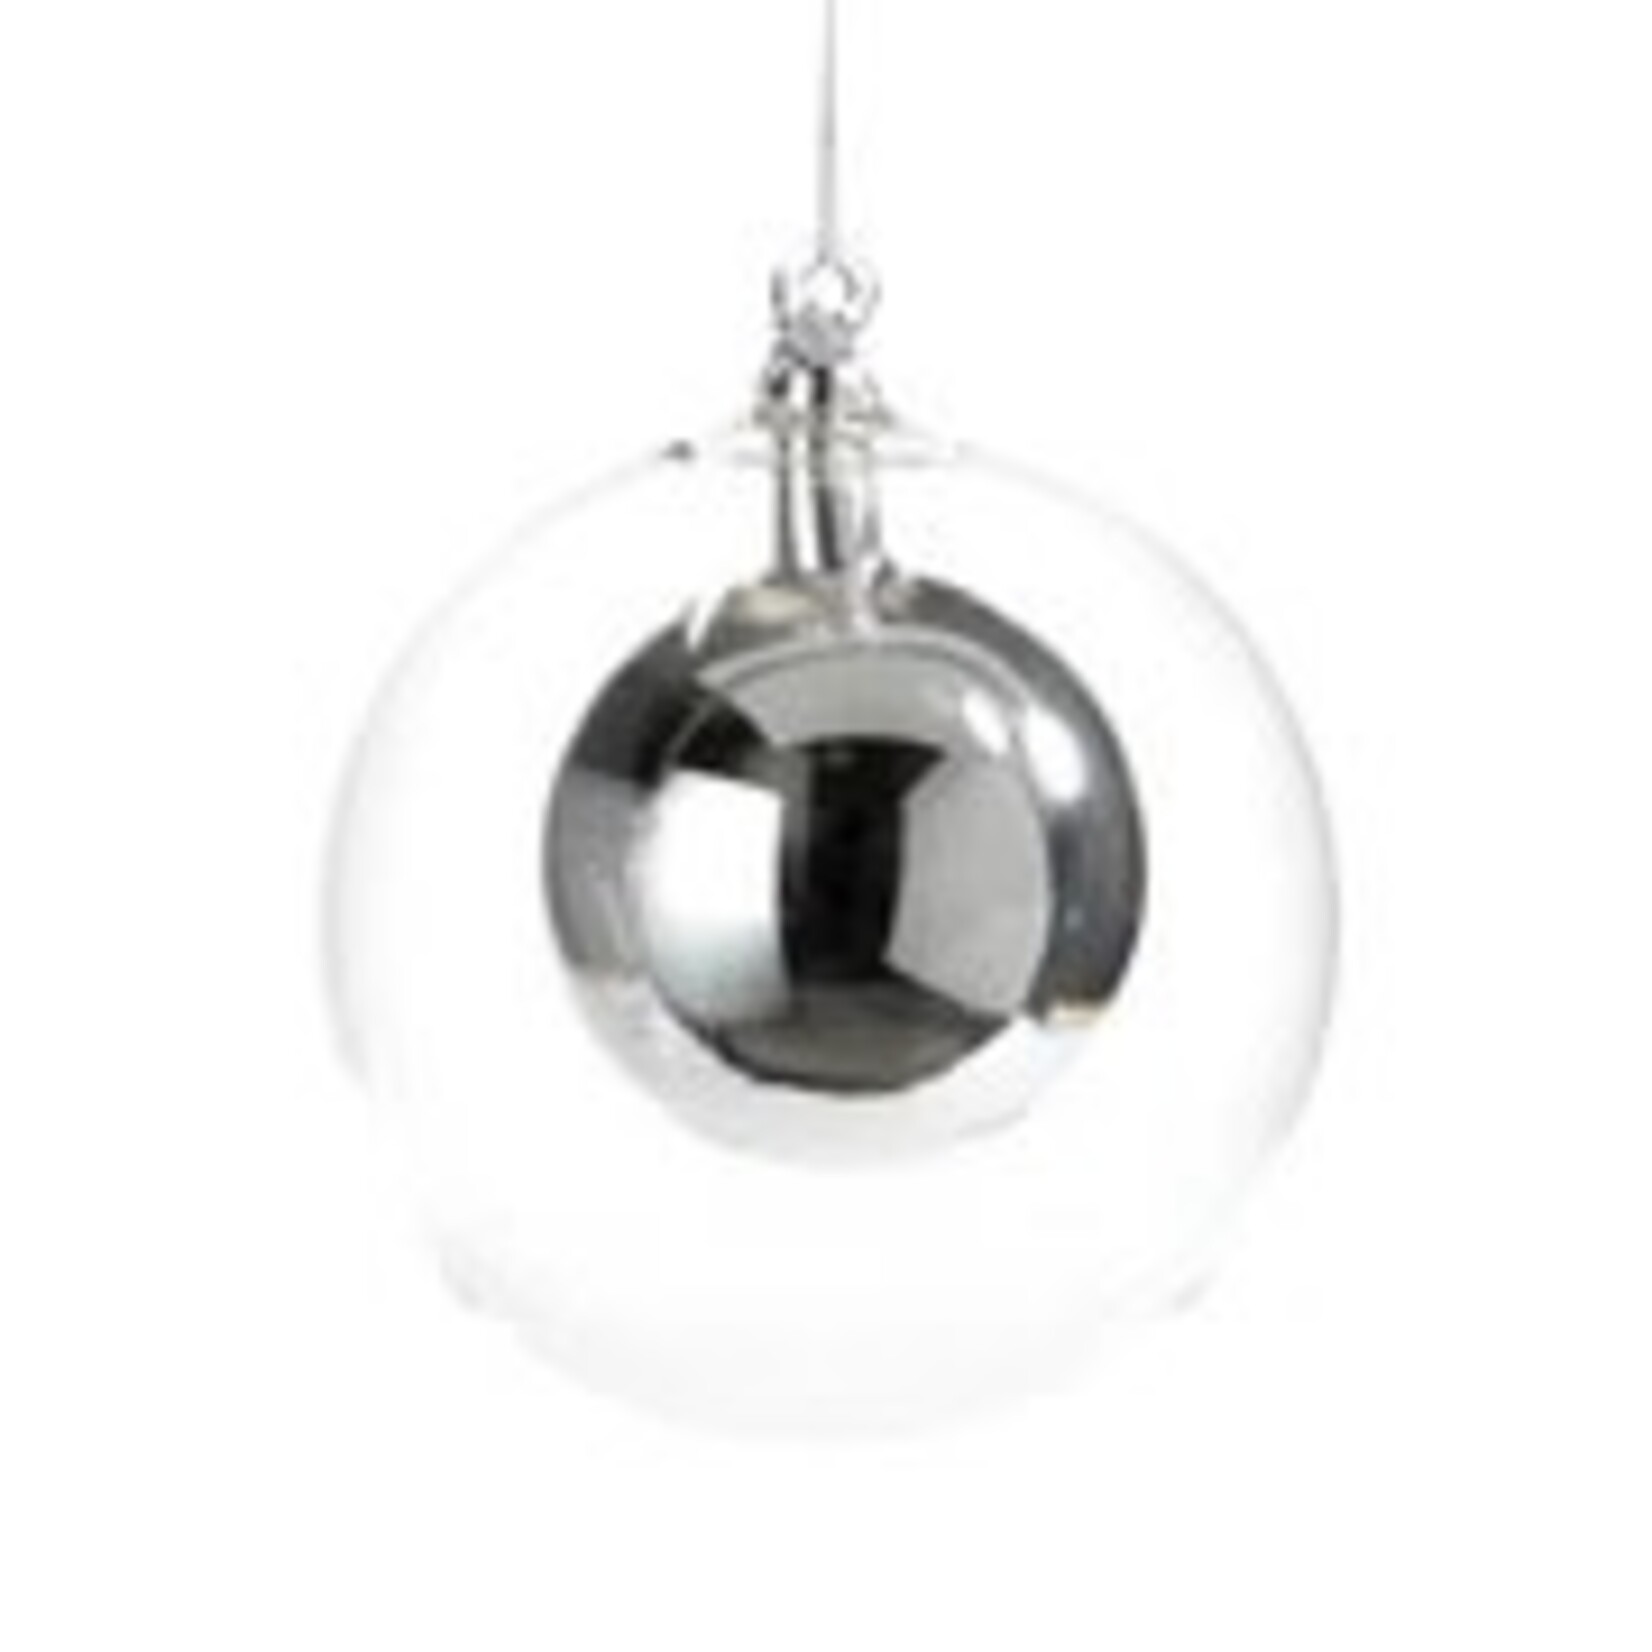 Zodax DOUBLE GLASS BALL ORNAMENT- SILVER/LARGE